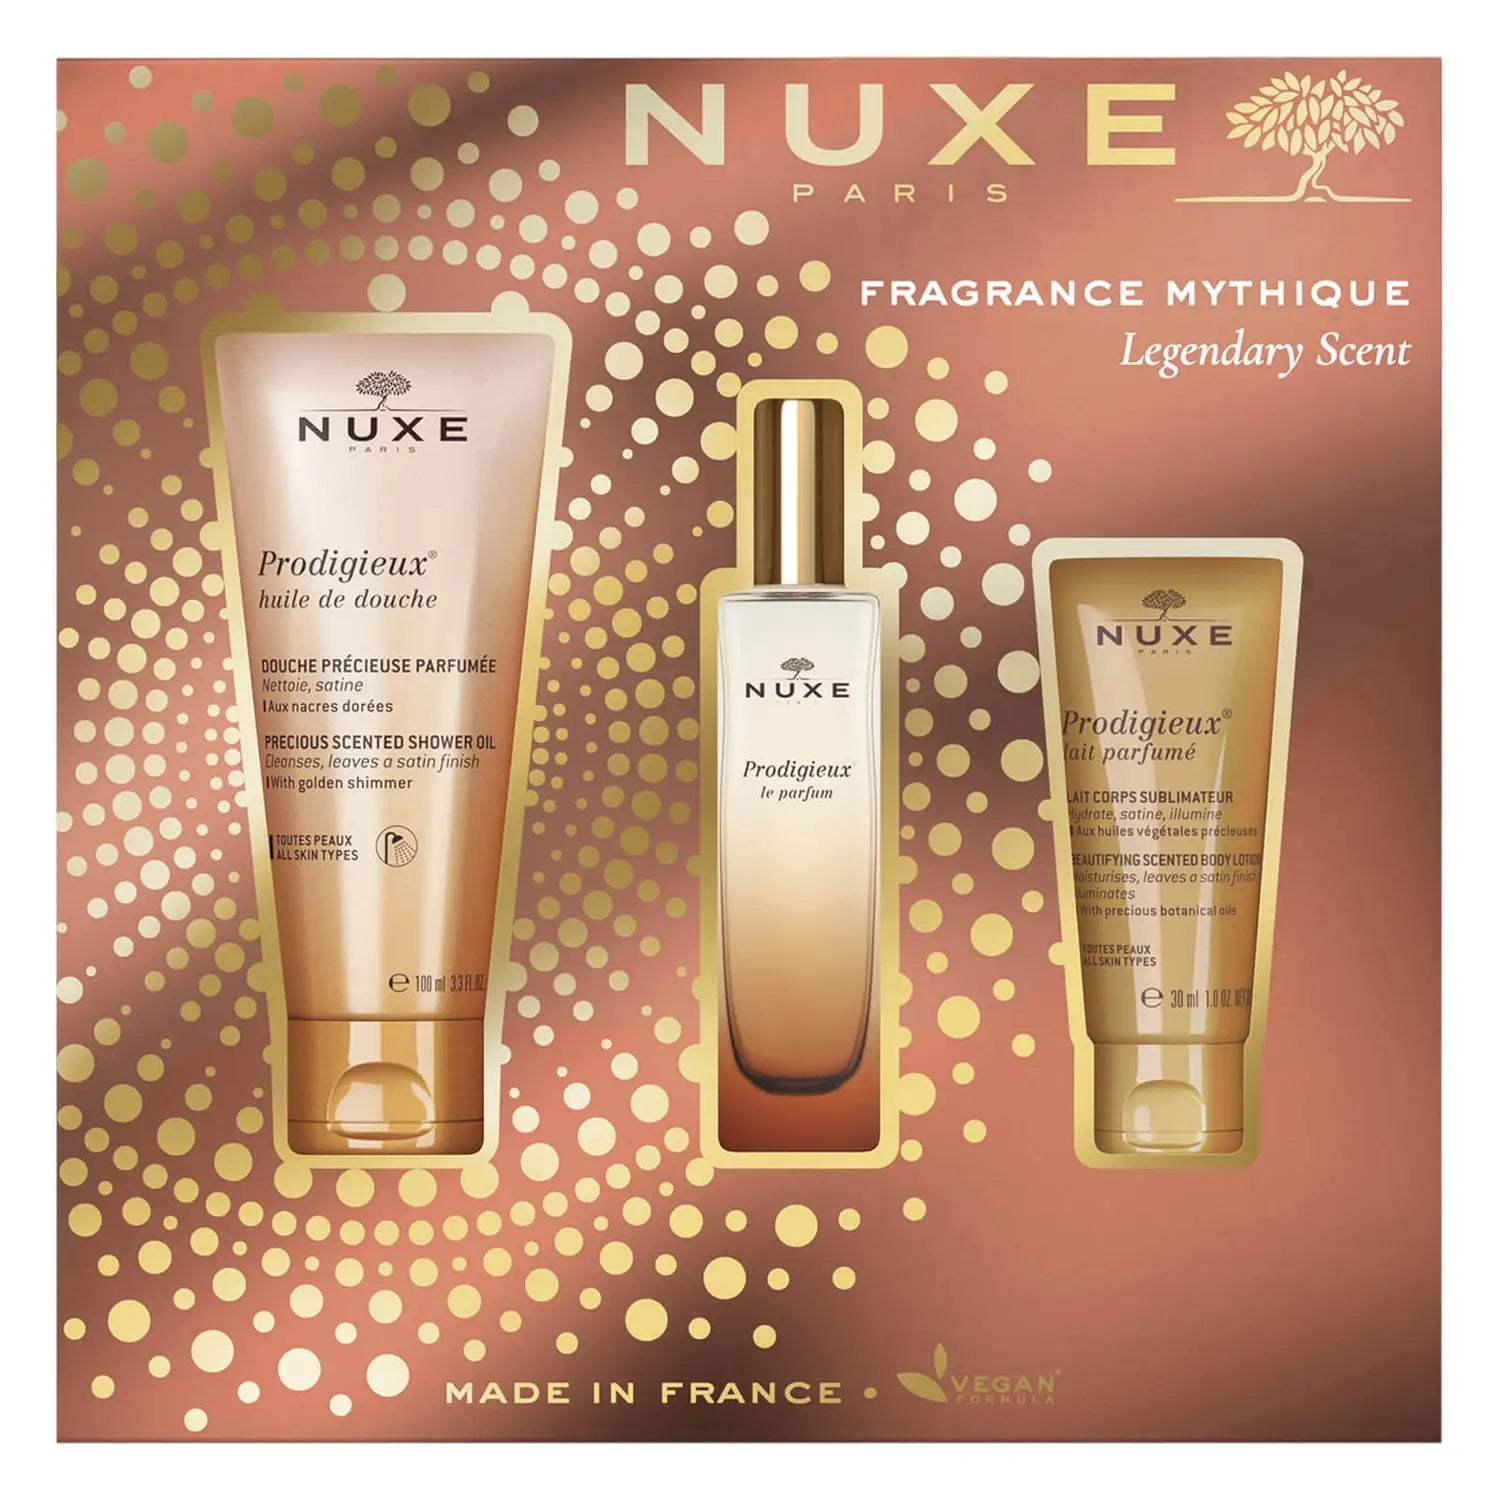 Nuxe Legendary Scent set Nuxe Perfume Gift Set - The captivating power of an iconic perfume